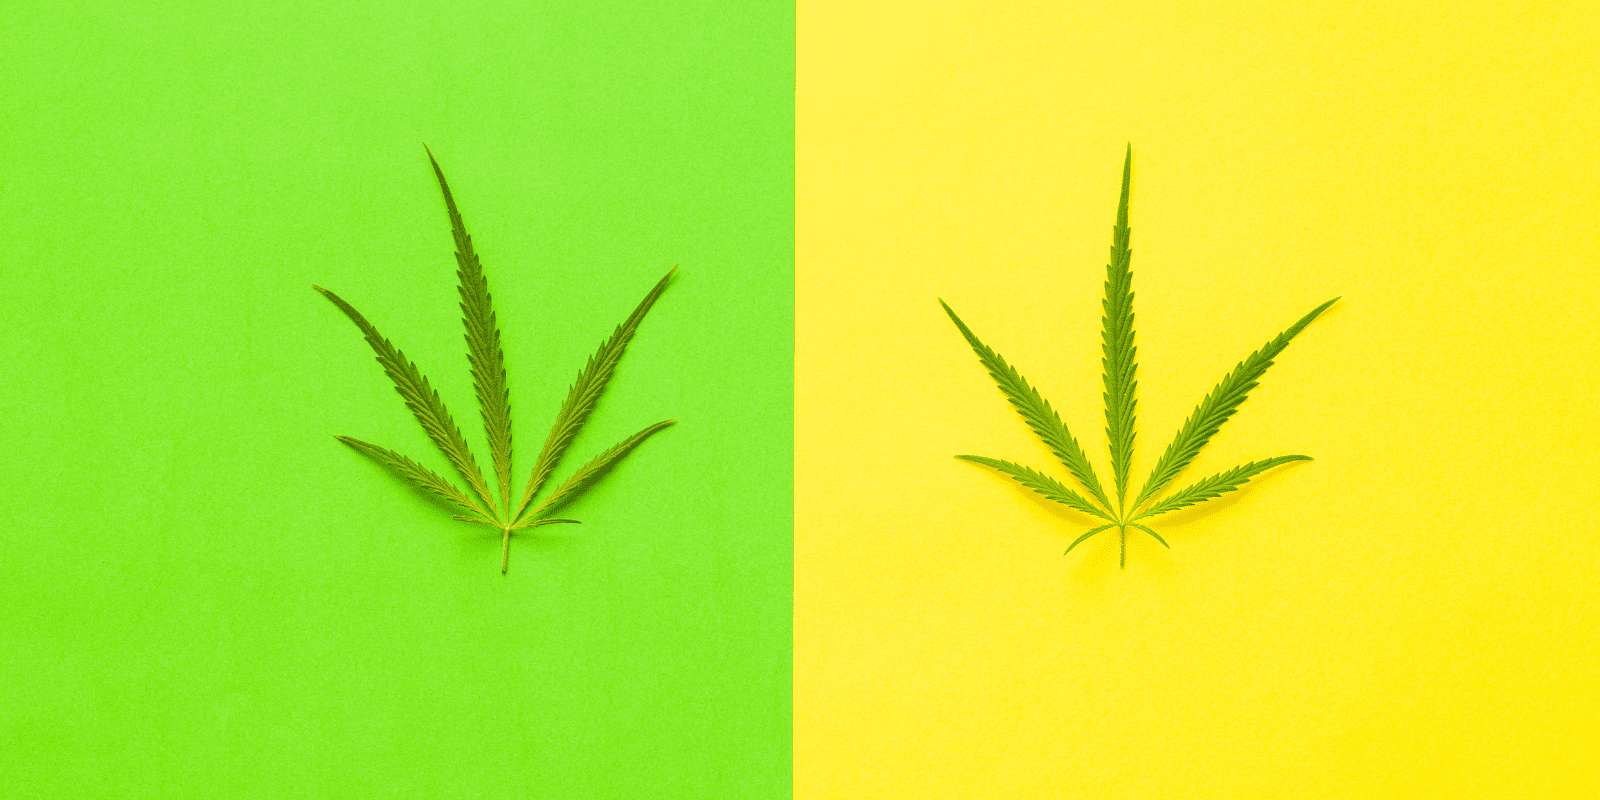 cannabis leaves on green and yellow backgrounds